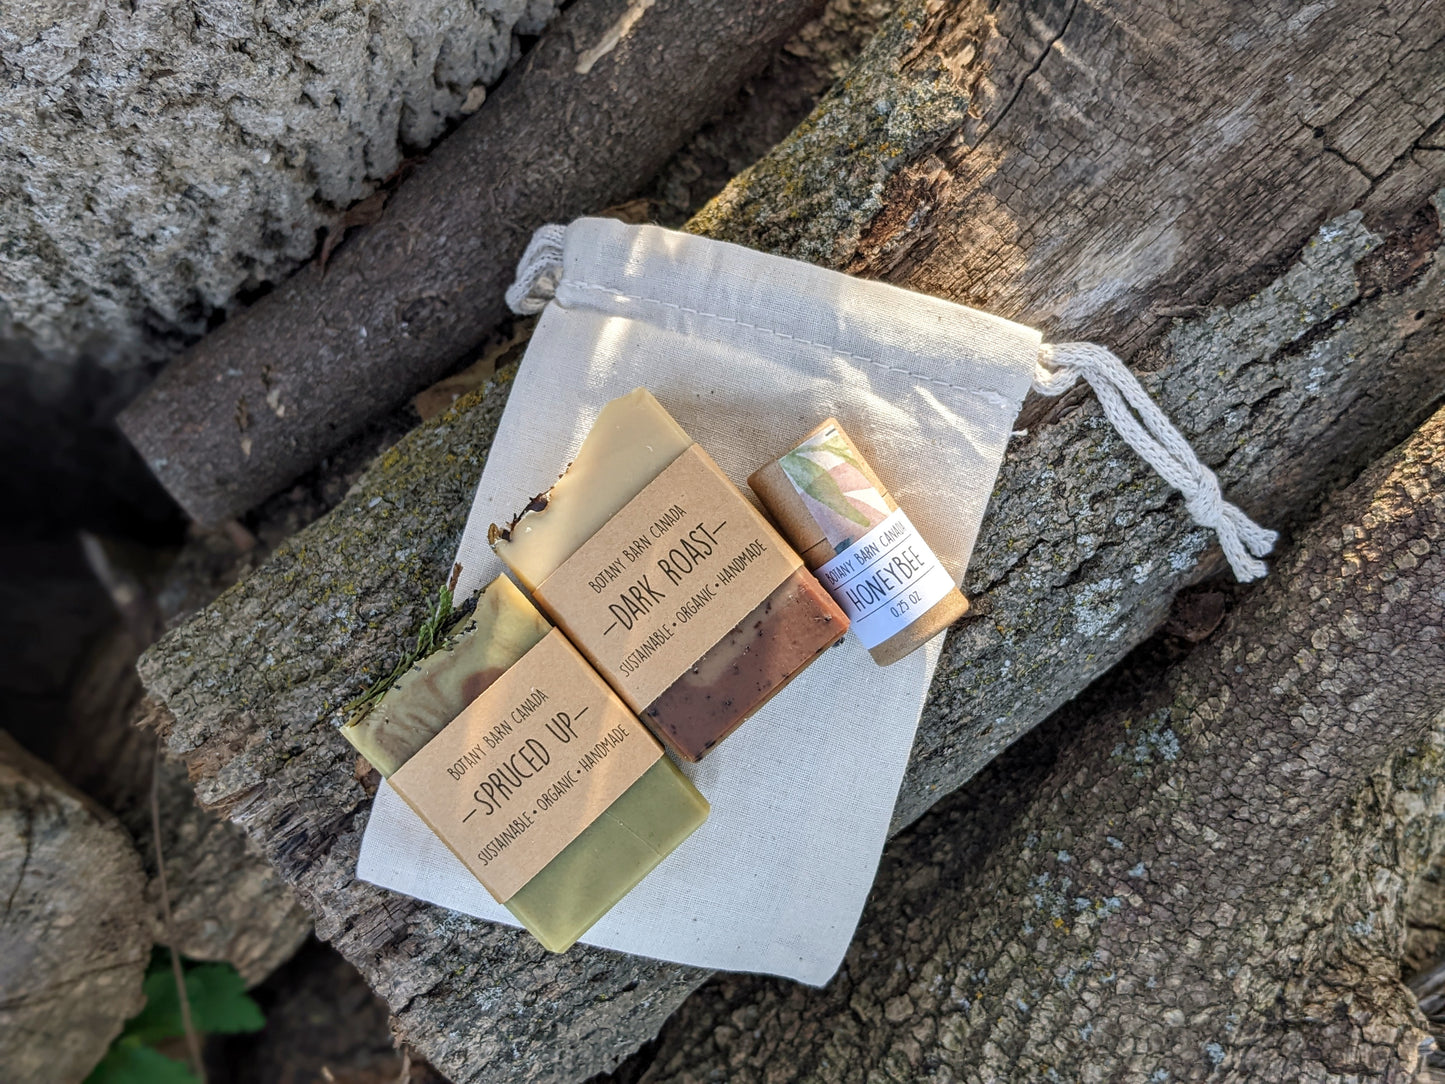 Small Wellness Gift of Two Mini Soaps & One Lip Balm in Cotton Bag